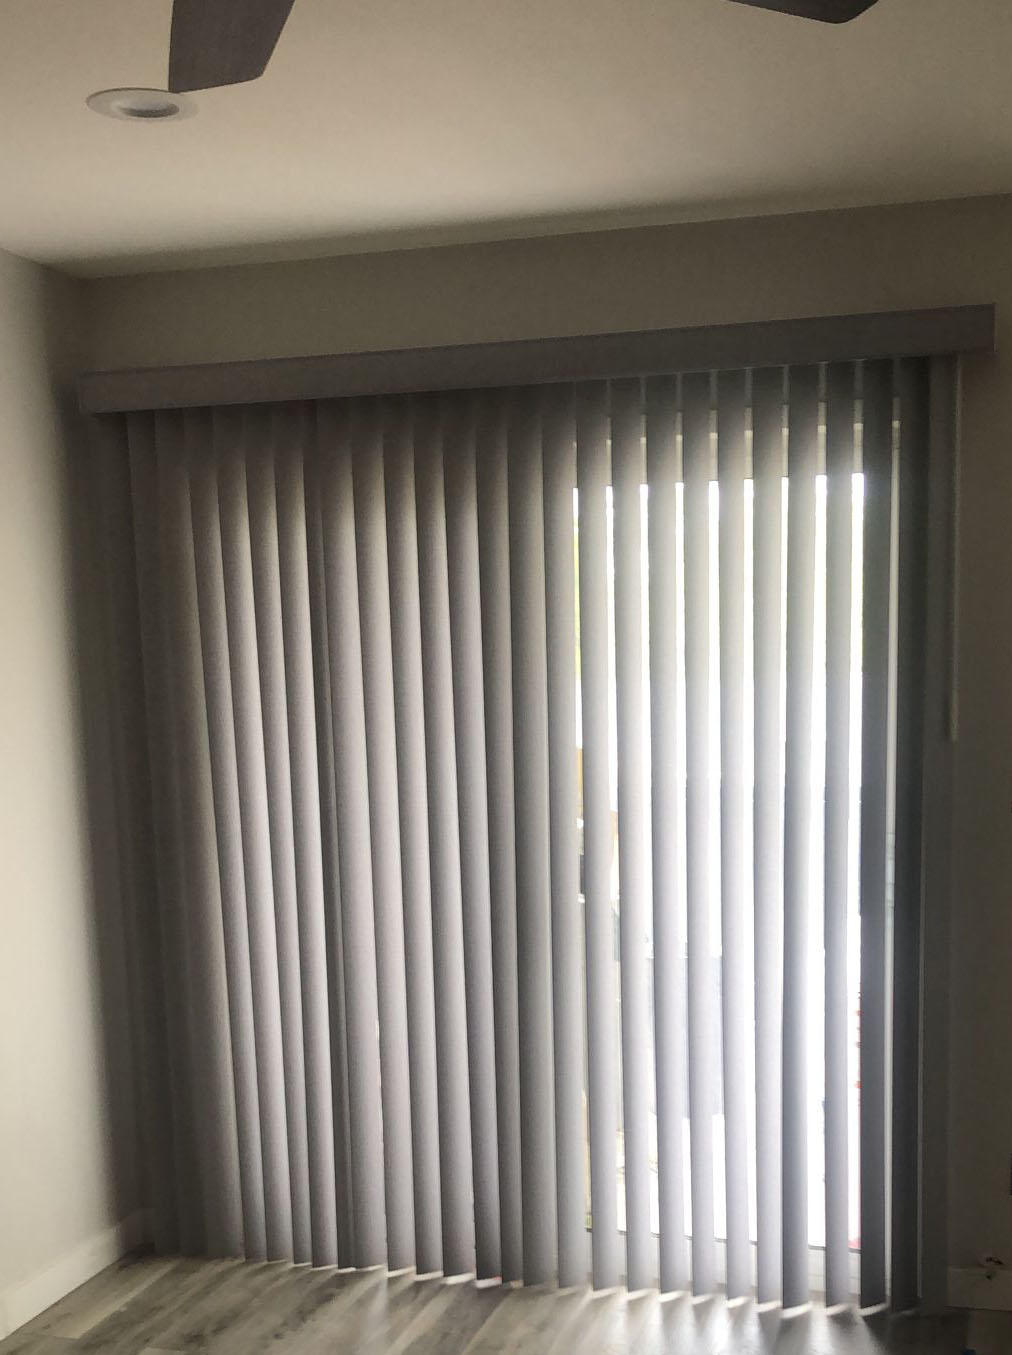 Choose from several operation options for your custom vertical blinds, including wand tilt, right draw, left draw, and split draw for convenience and personalized view control.